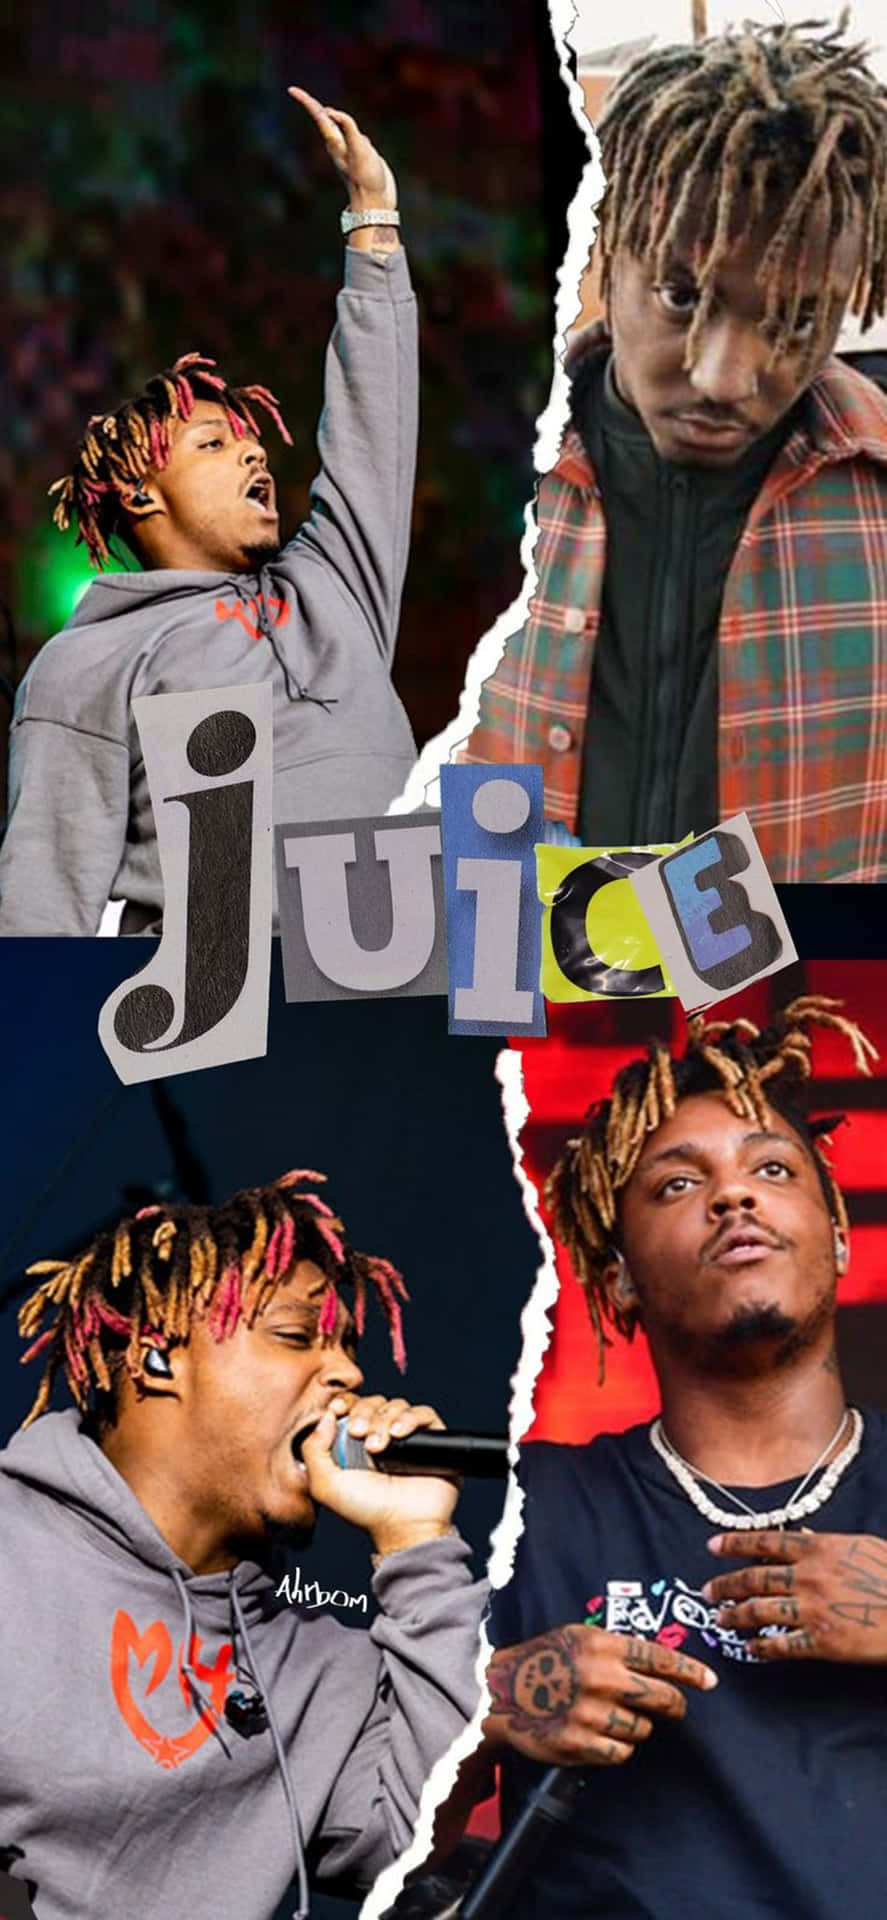 A Collage Of Pictures With The Word Juice Background